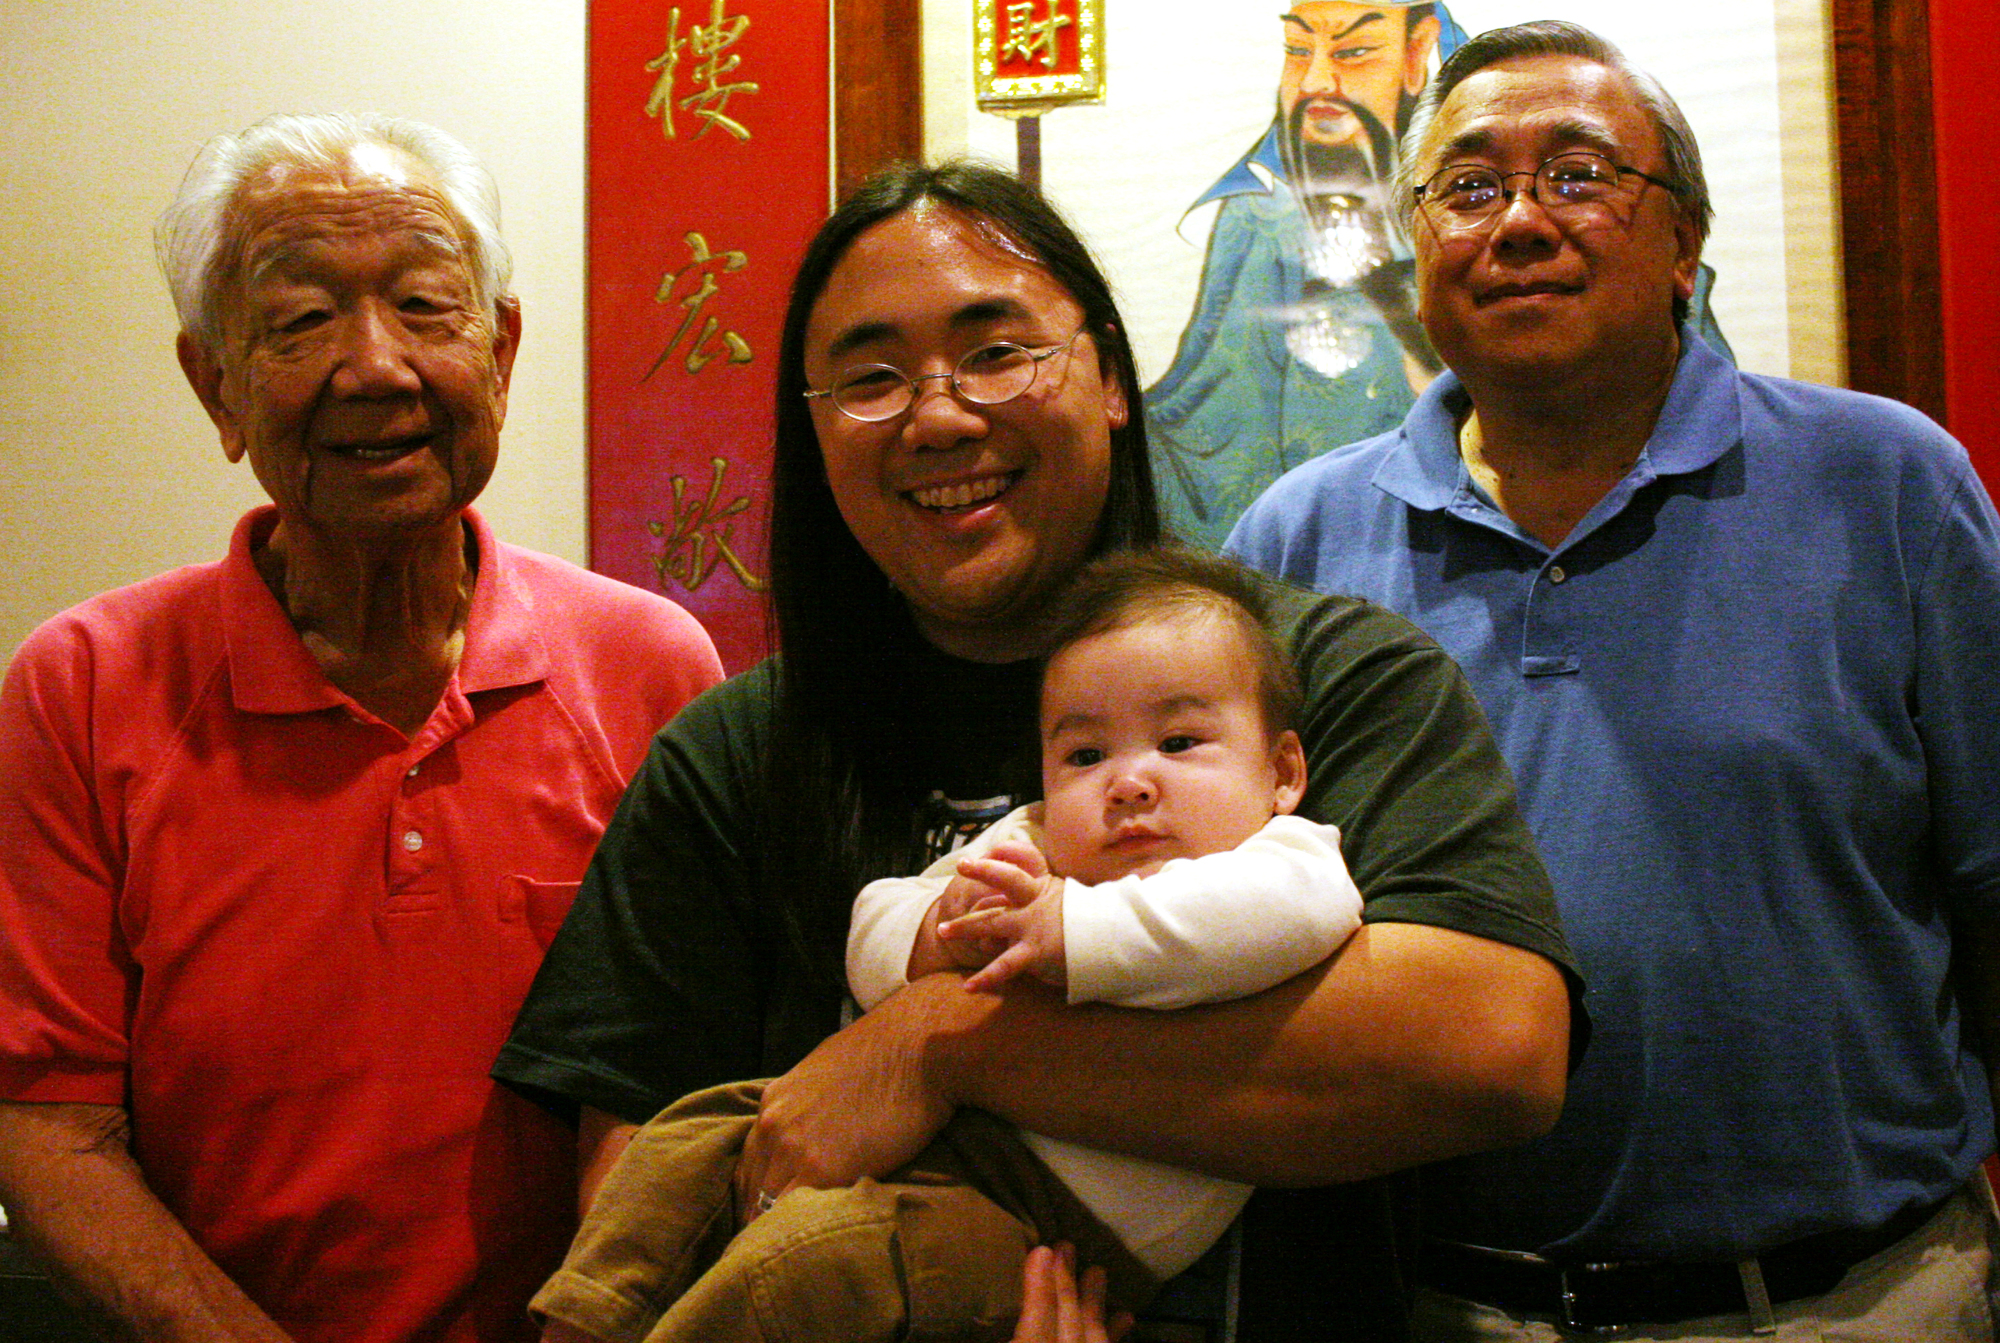 My grandfather and father paved the way for my children and me. From left: My grandfather, Soon D. Eng; me; my son, Lyric Eng; and my father, John Eng.